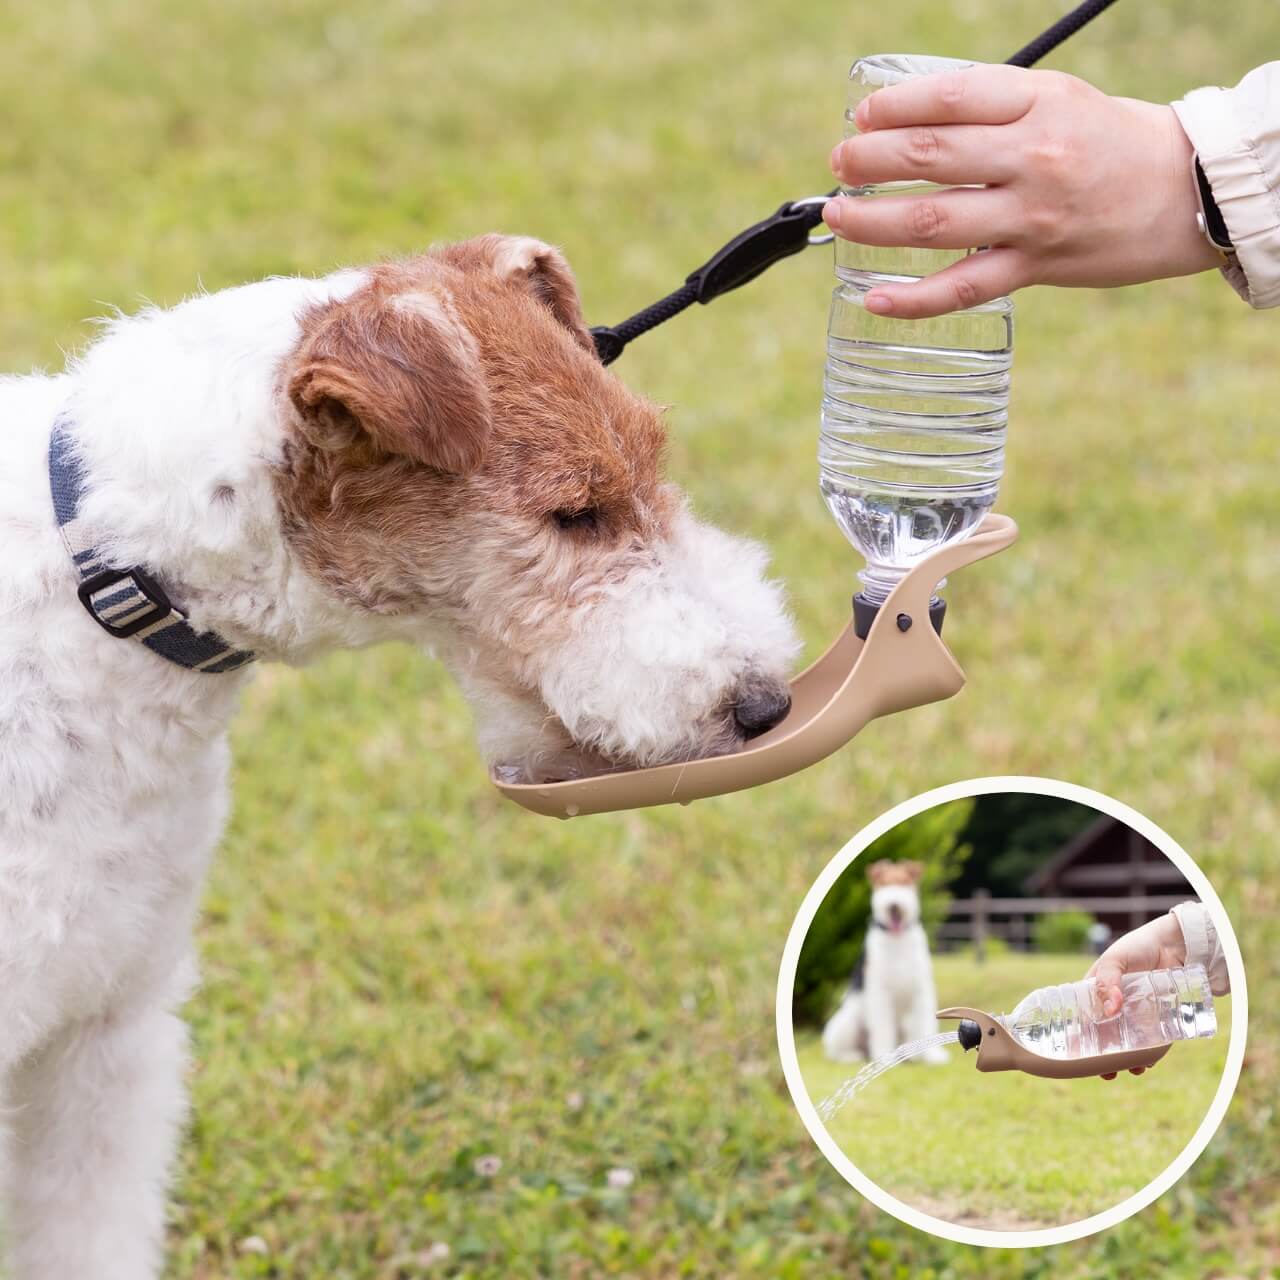 "Marktus Handy Shower" Simple design that can be attached to a PET bottle